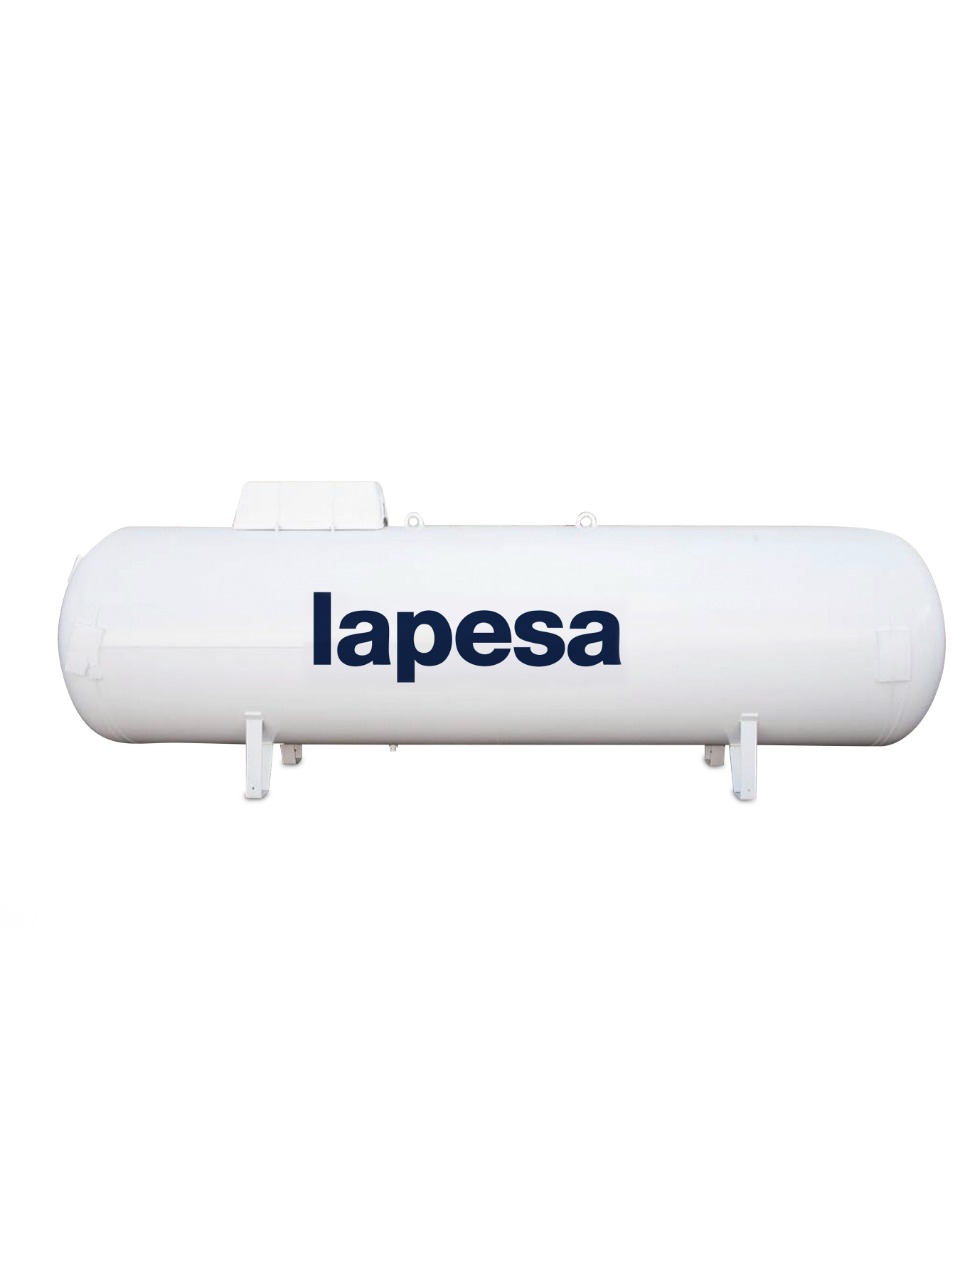 LPG TANK LAPESA 1900 LITERS ABOVE GROUND WITH STANDARD VALVE FITTINGS from Gas Equipment Company Llc Abu Dhabi, UNITED ARAB EMIRATES